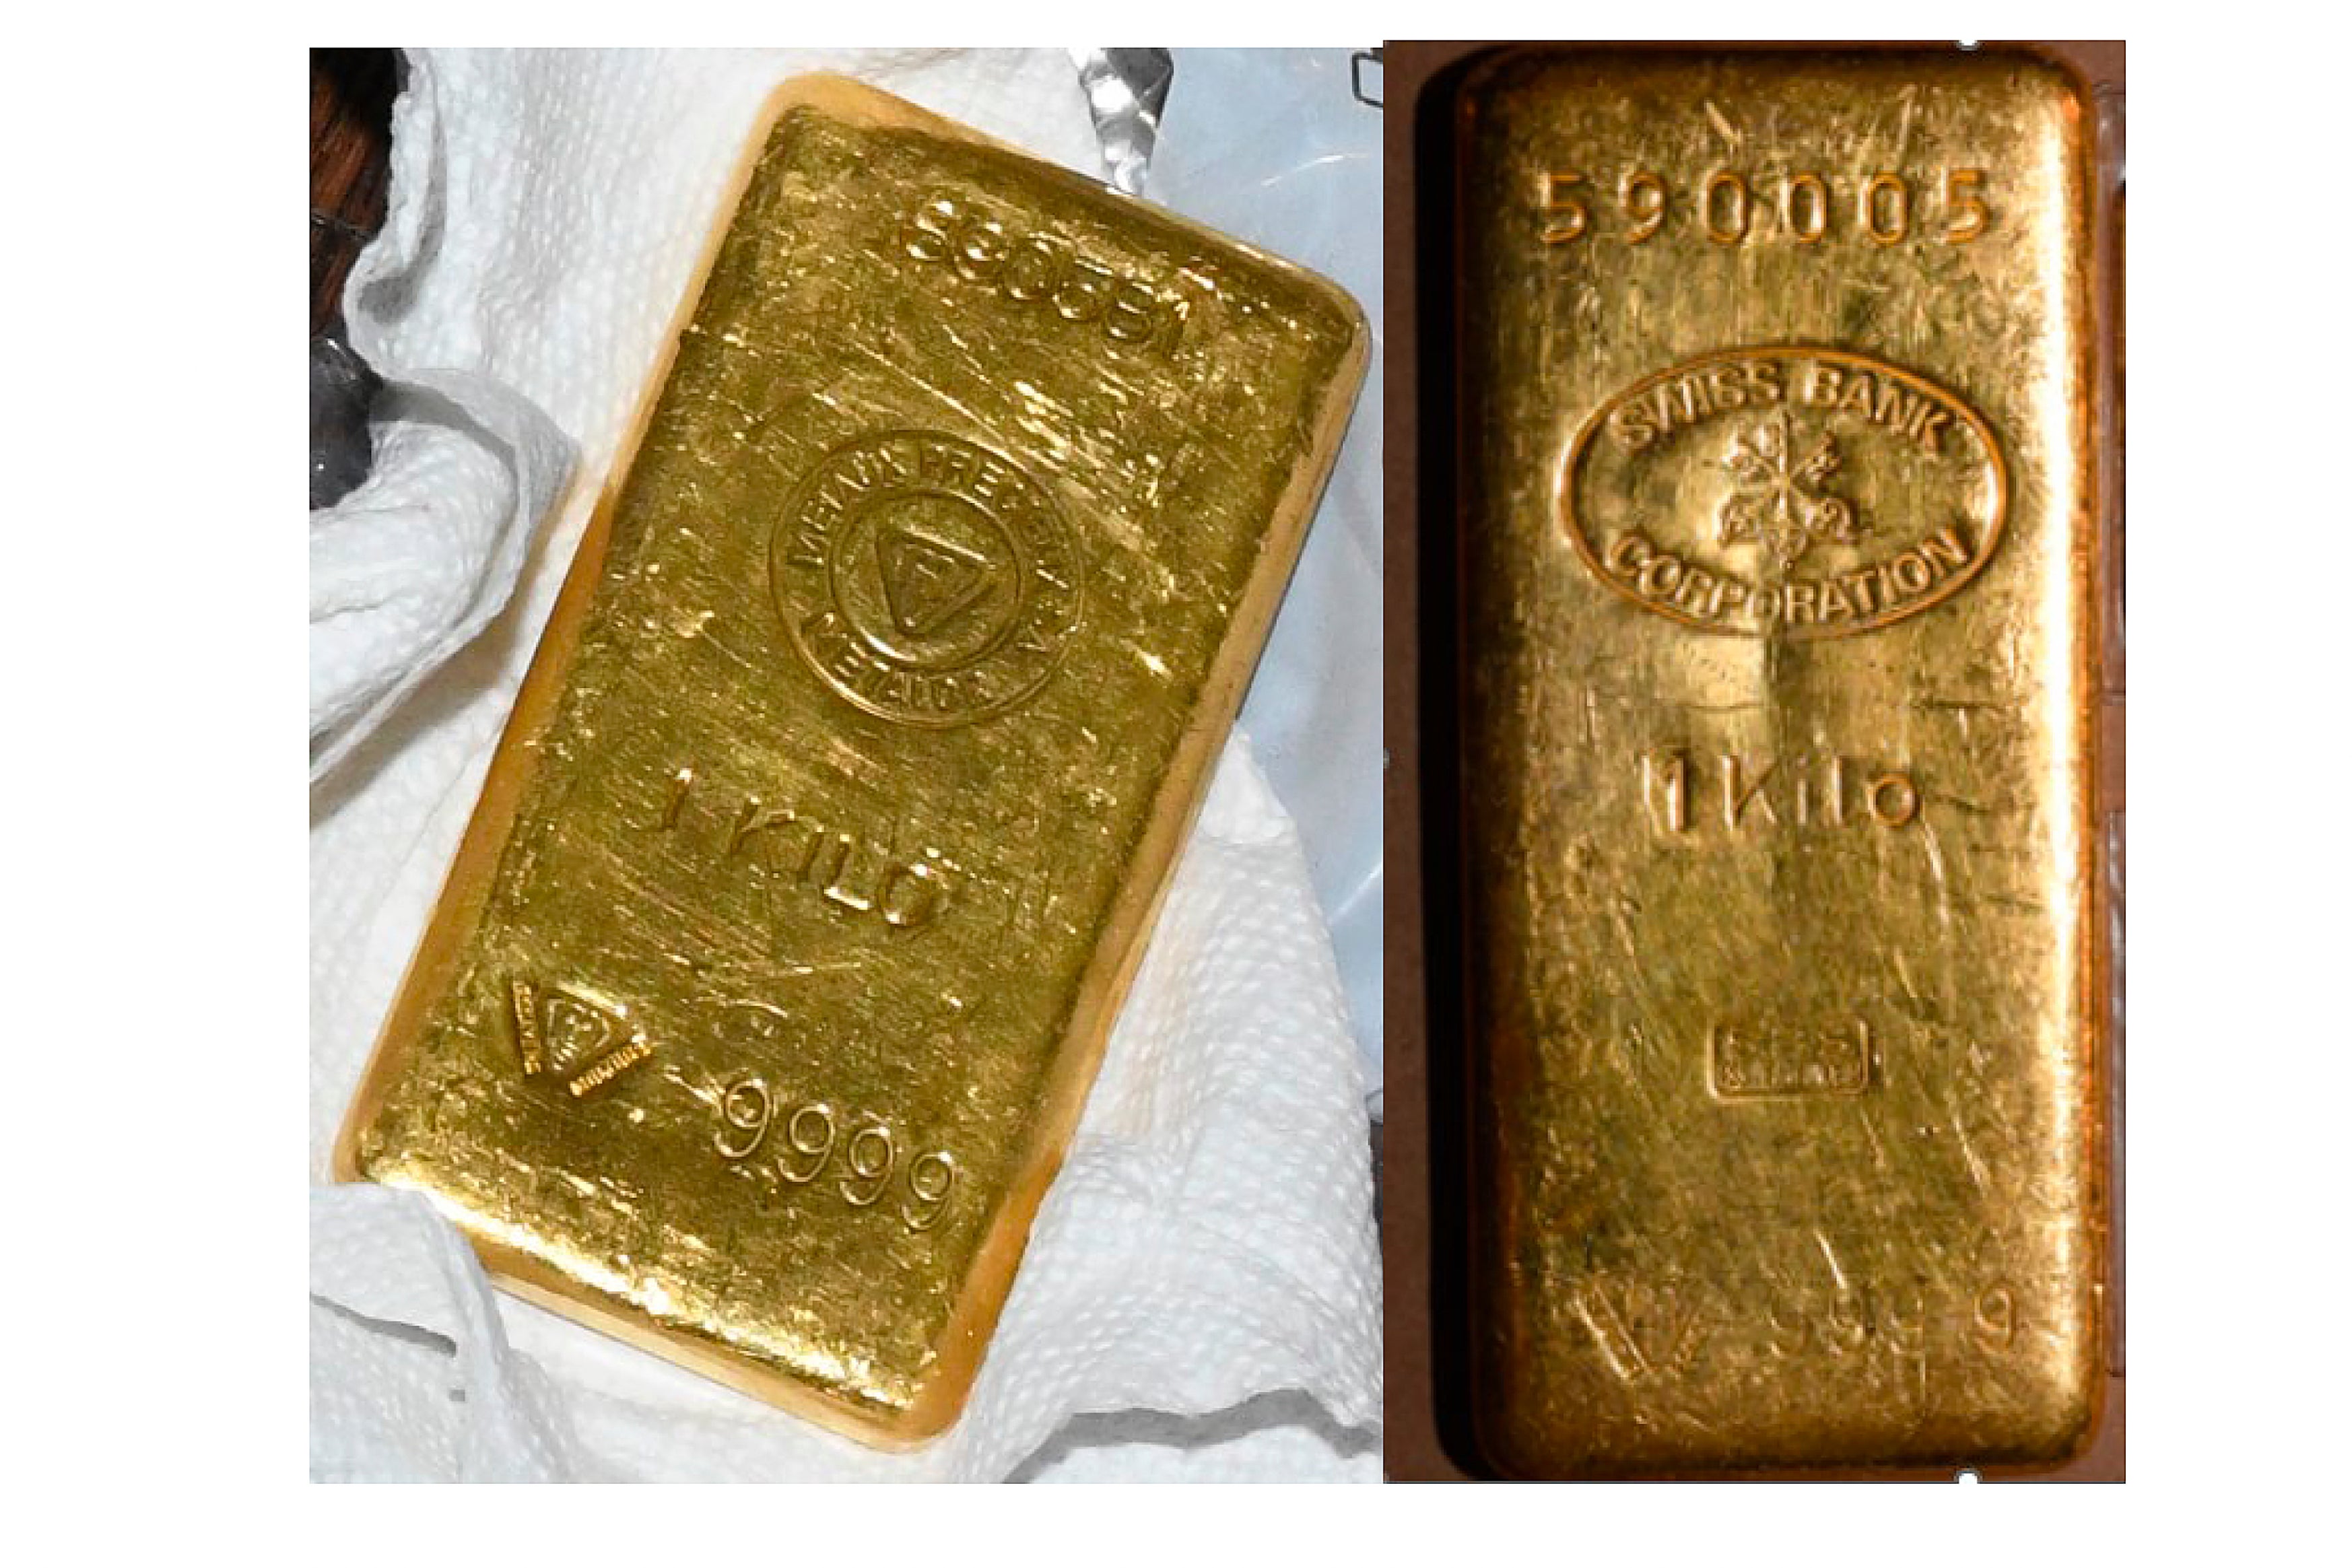 Two of the gold bars found during a search by federal agents of Senator Bob Menendez's home and safe deposit box in New Jersey